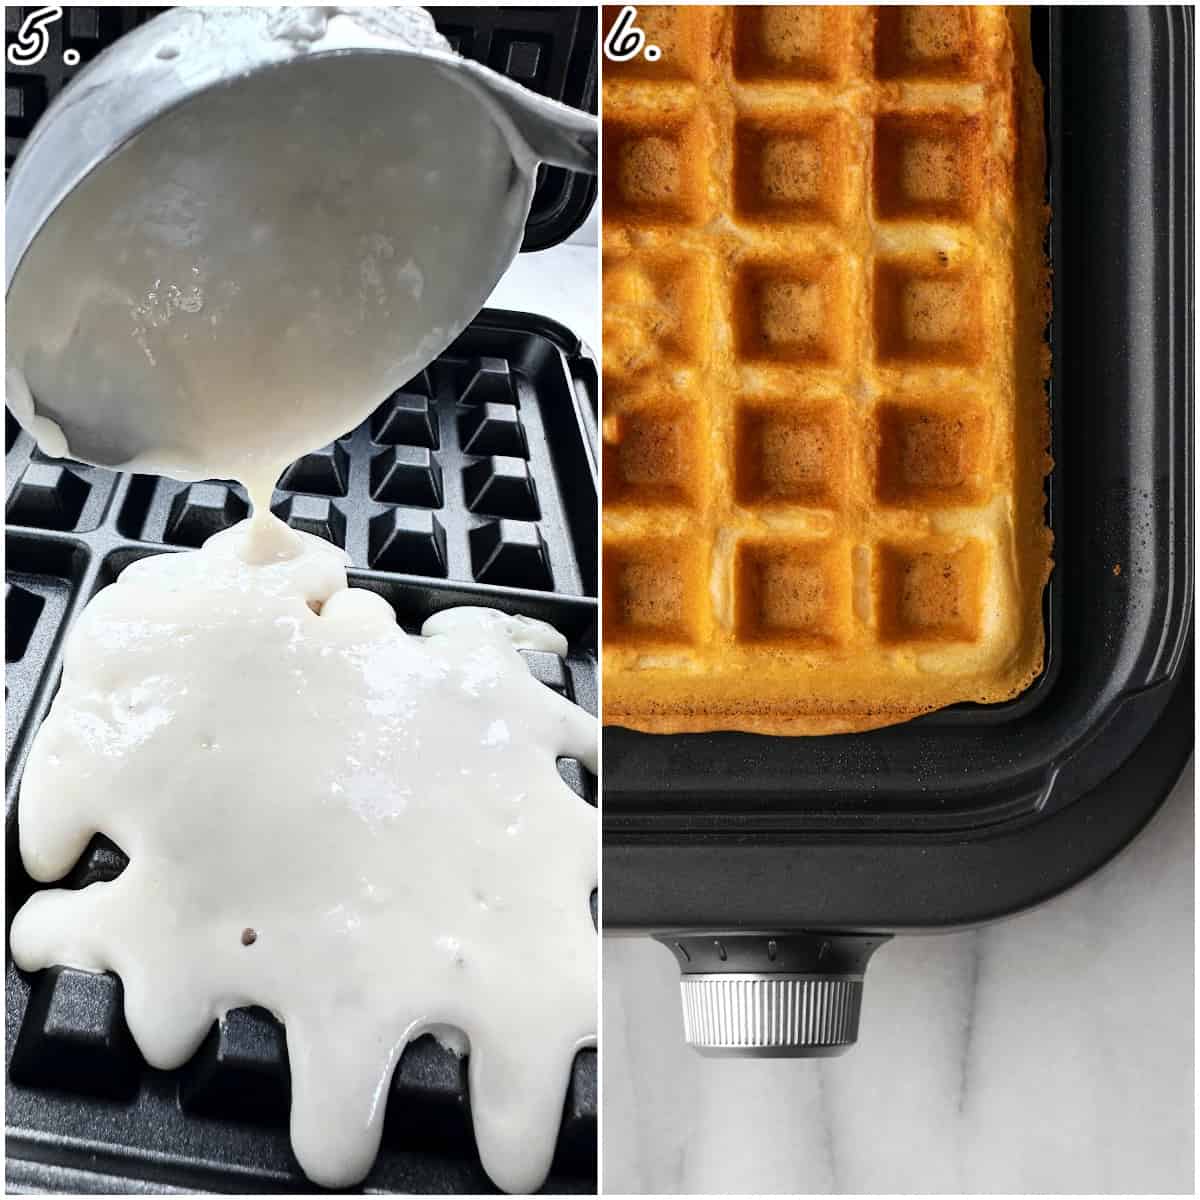 two process photos showing uncooked batter in a waffle iron and one fully cooked waffle.